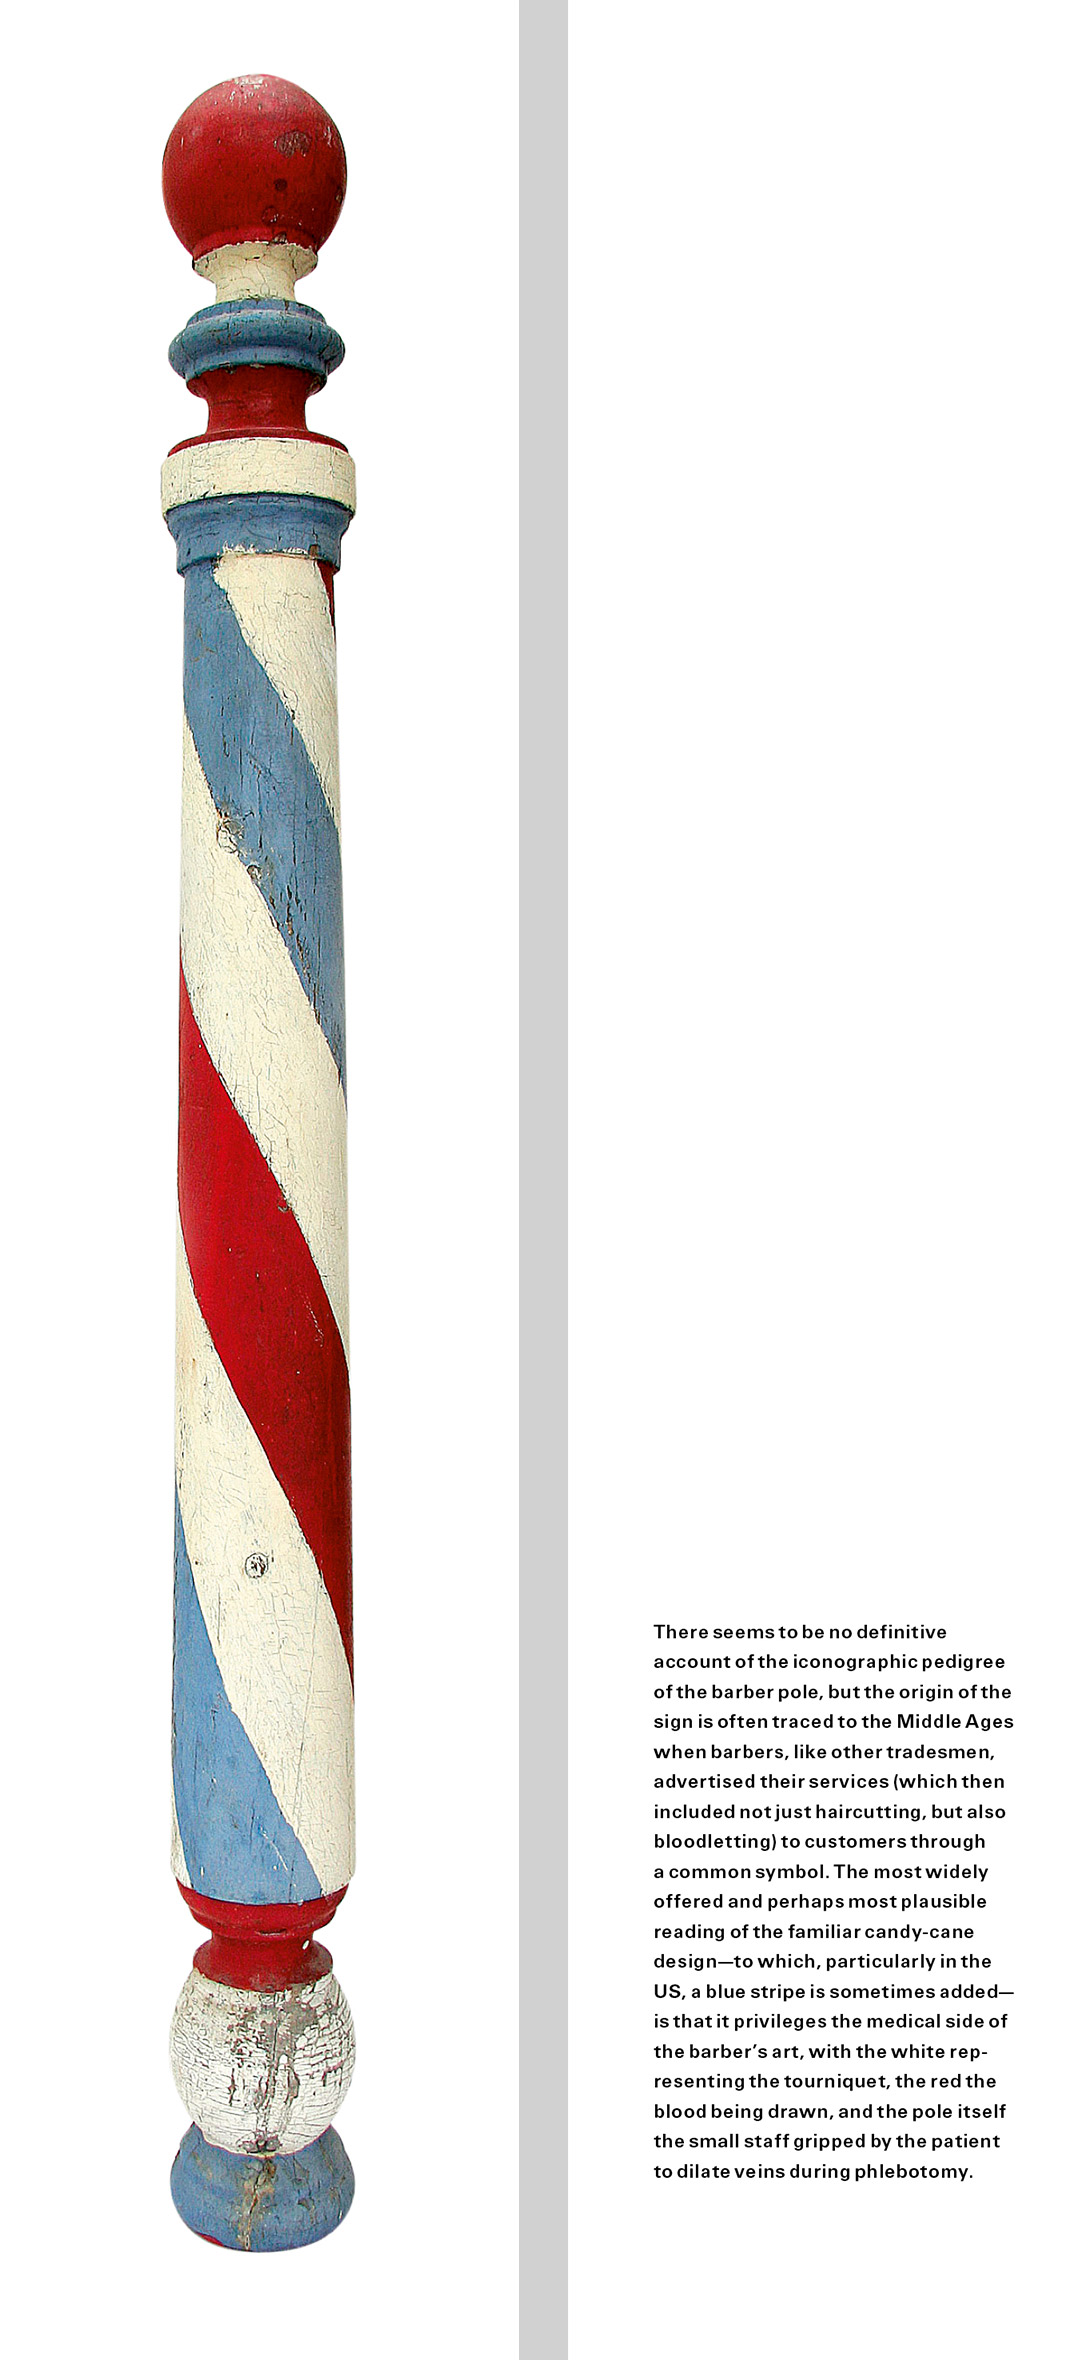 The front and back of a bookmark. The front is a photograph of a red, white, and blue barber pole. The back contains text that reads: “There seems to be no definitive account of the iconographic pedigree of the barber pole, but the origin of the sign is often traced to the Middle Ages when barbers, like other tradesmen, advertised their services (which then included not just haircutting, but also bloodletting) to customers through a common symbol. The most widely offered and perhaps most plausible reading of the familiar candy-cane design—to which, particularly in the US, a blue stripe is sometimes added—is that it privileges the medical side of the barber’s art, with the white representing the tourniquet, the red the blood being drawn, and the pole itself the small staff gripped by the patient to dilate veins during phlebotomy.”